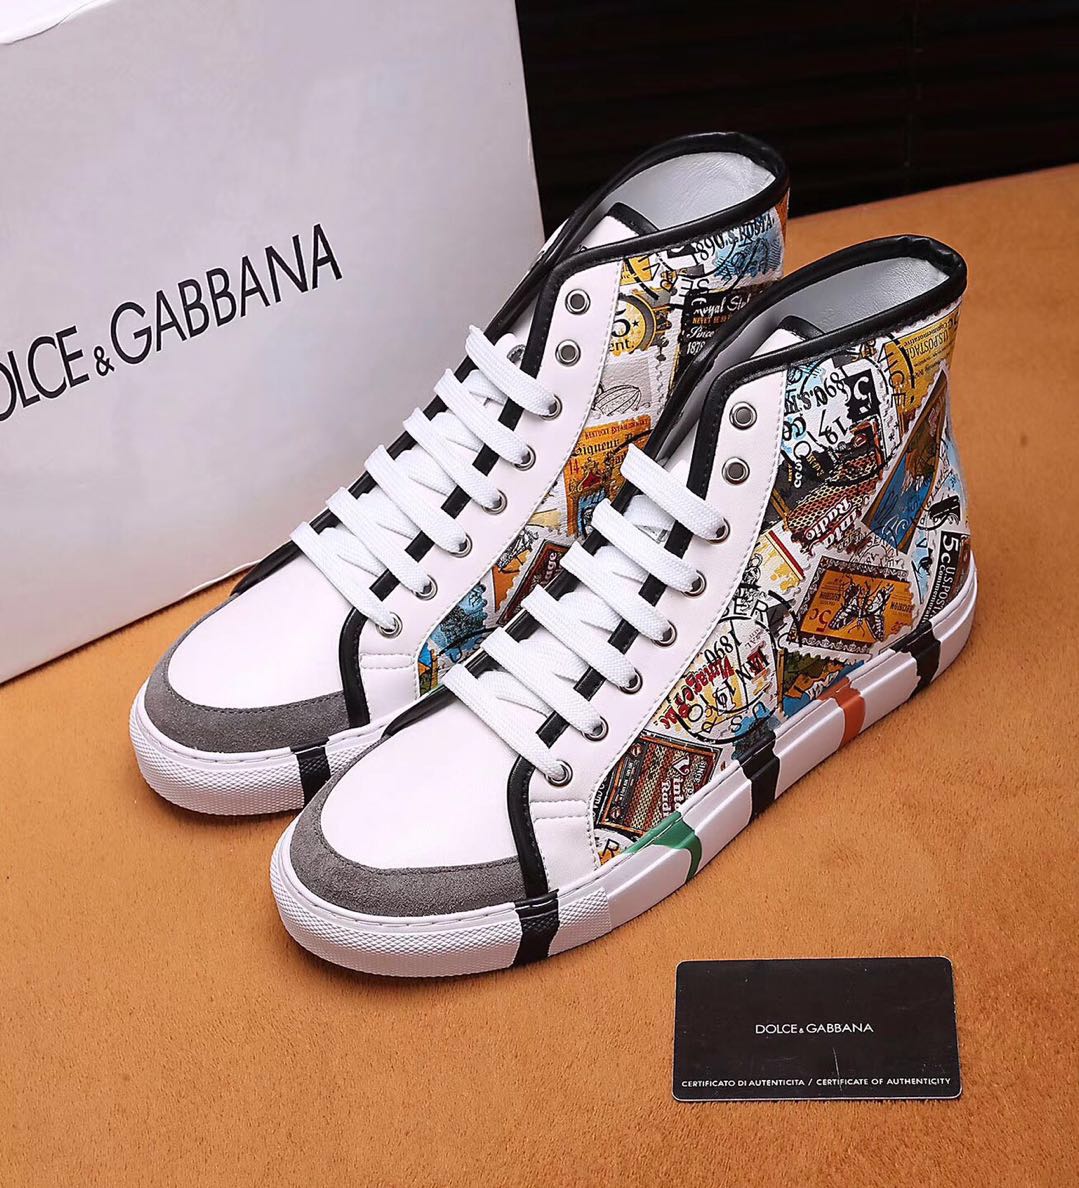 D&G Dolce&Gabbana Men's Leather Fashion High Top Sneakers Shoes